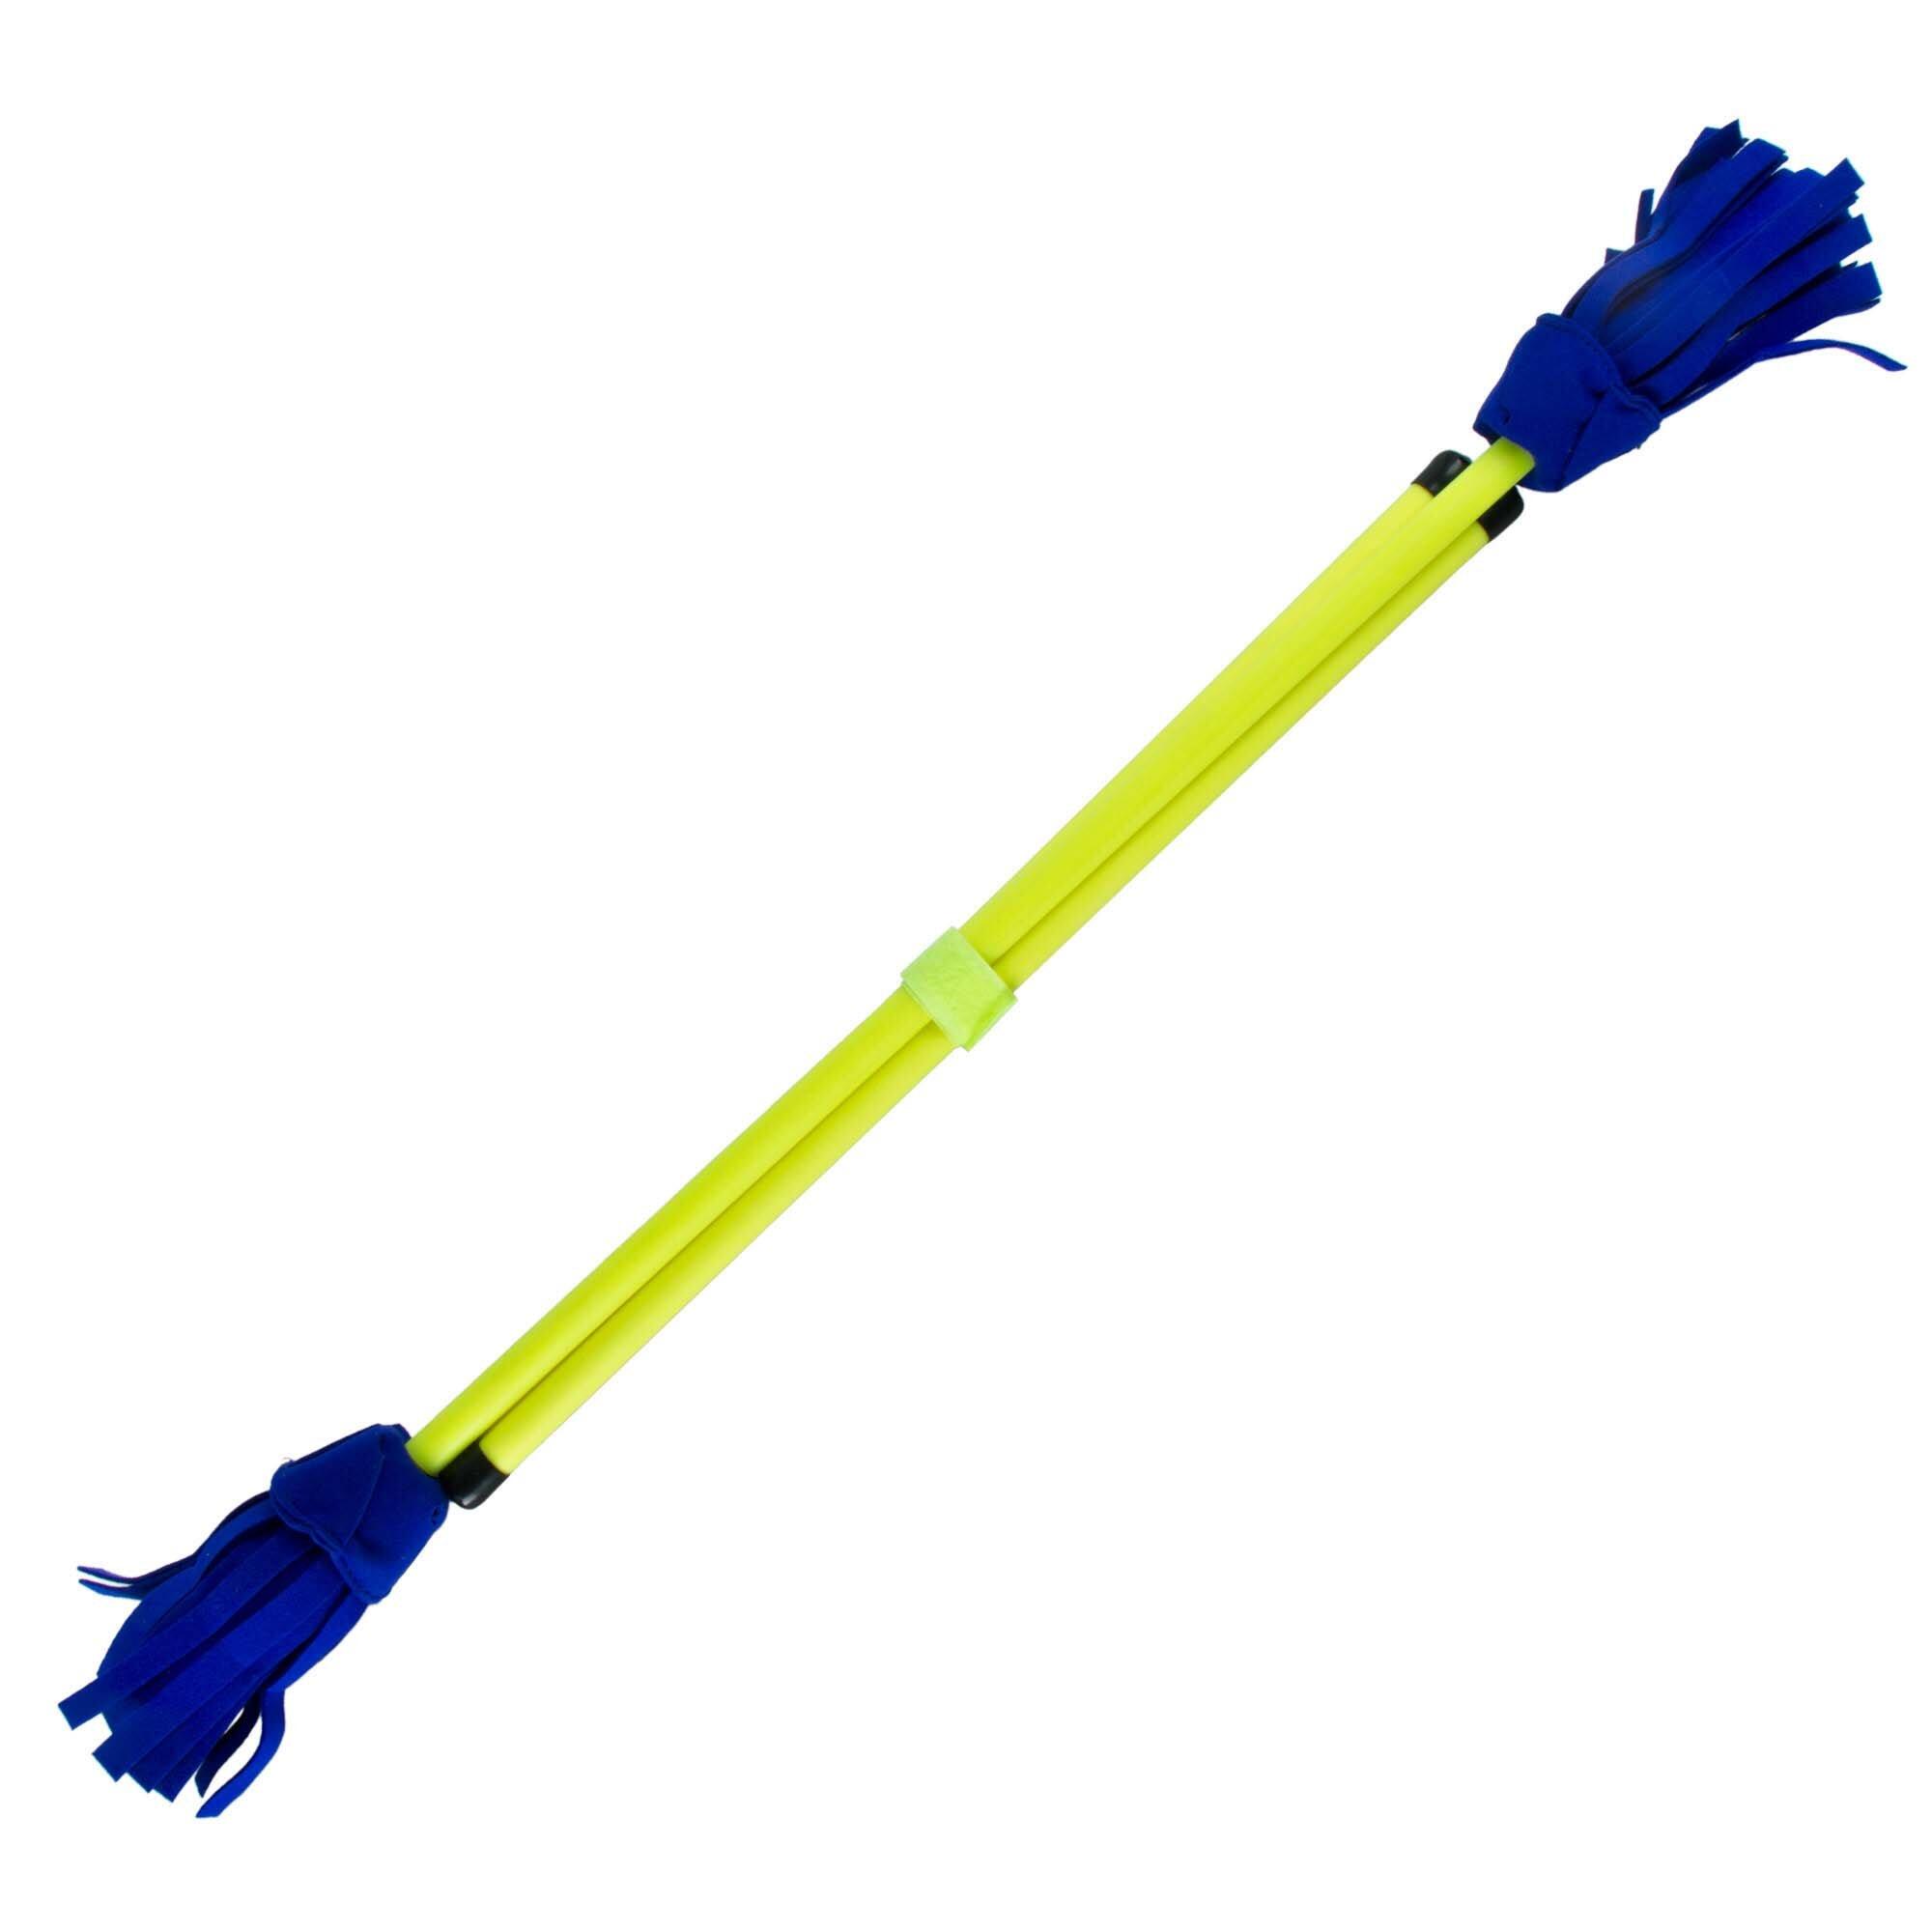 FIRETOYS Neo Fluoro Flower Stick and Hand Sticks-Yellow with Blue Tassels